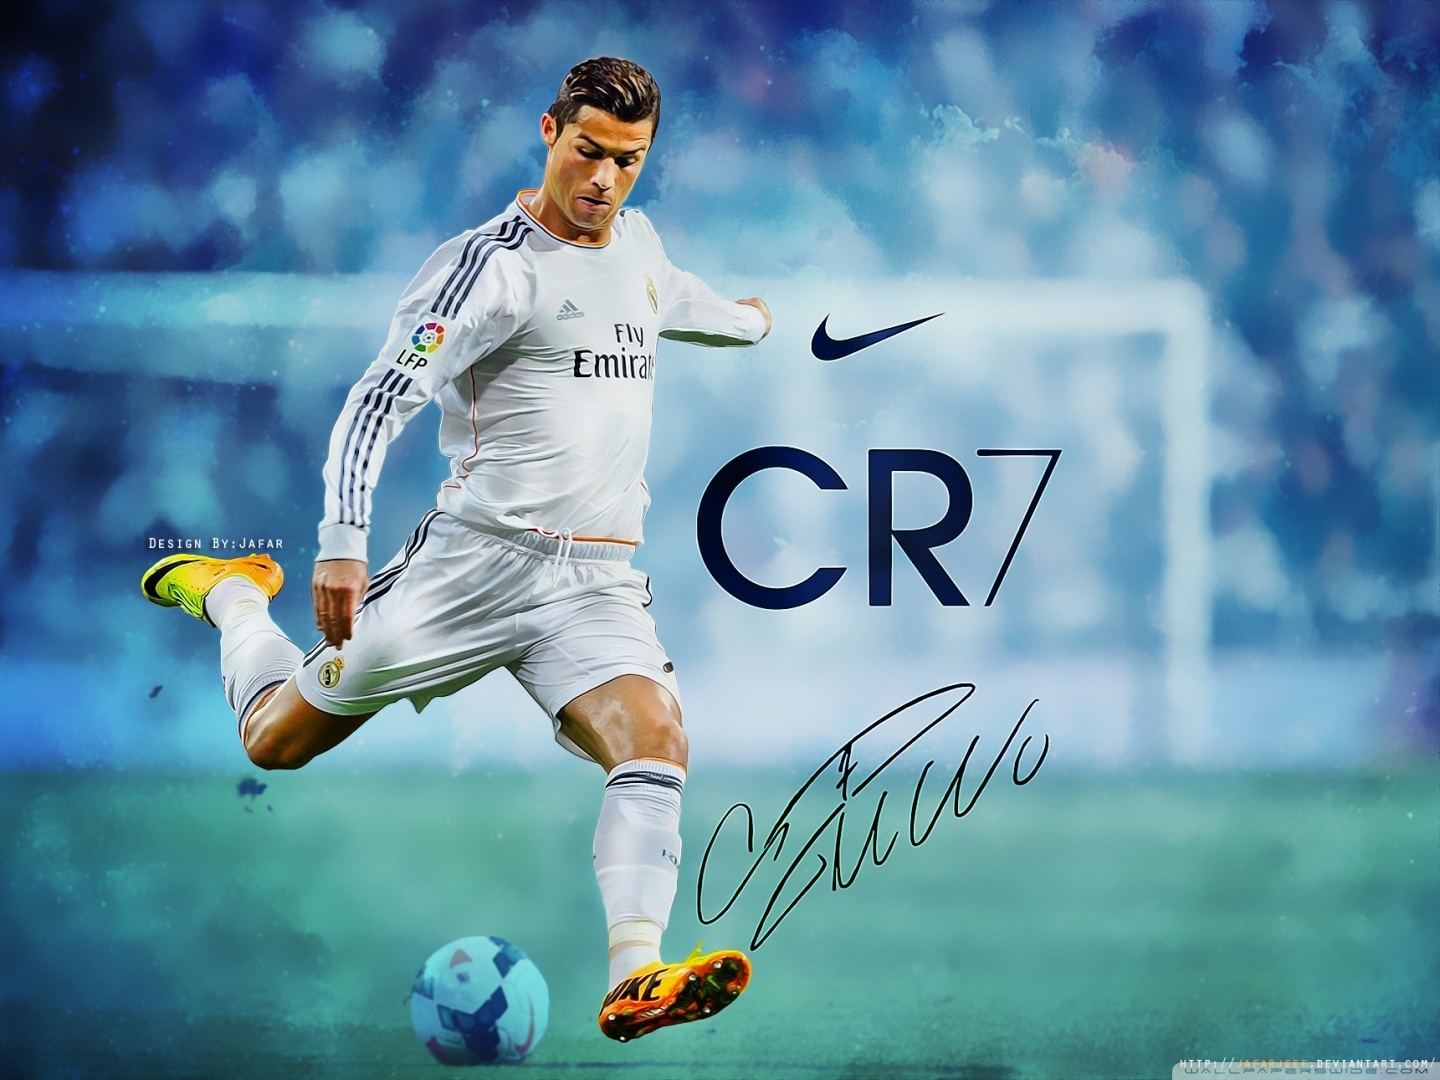 10 Top Wallpapers Of Cristiano Ronaldo FULL HD 1920 215 1080 For PC Background